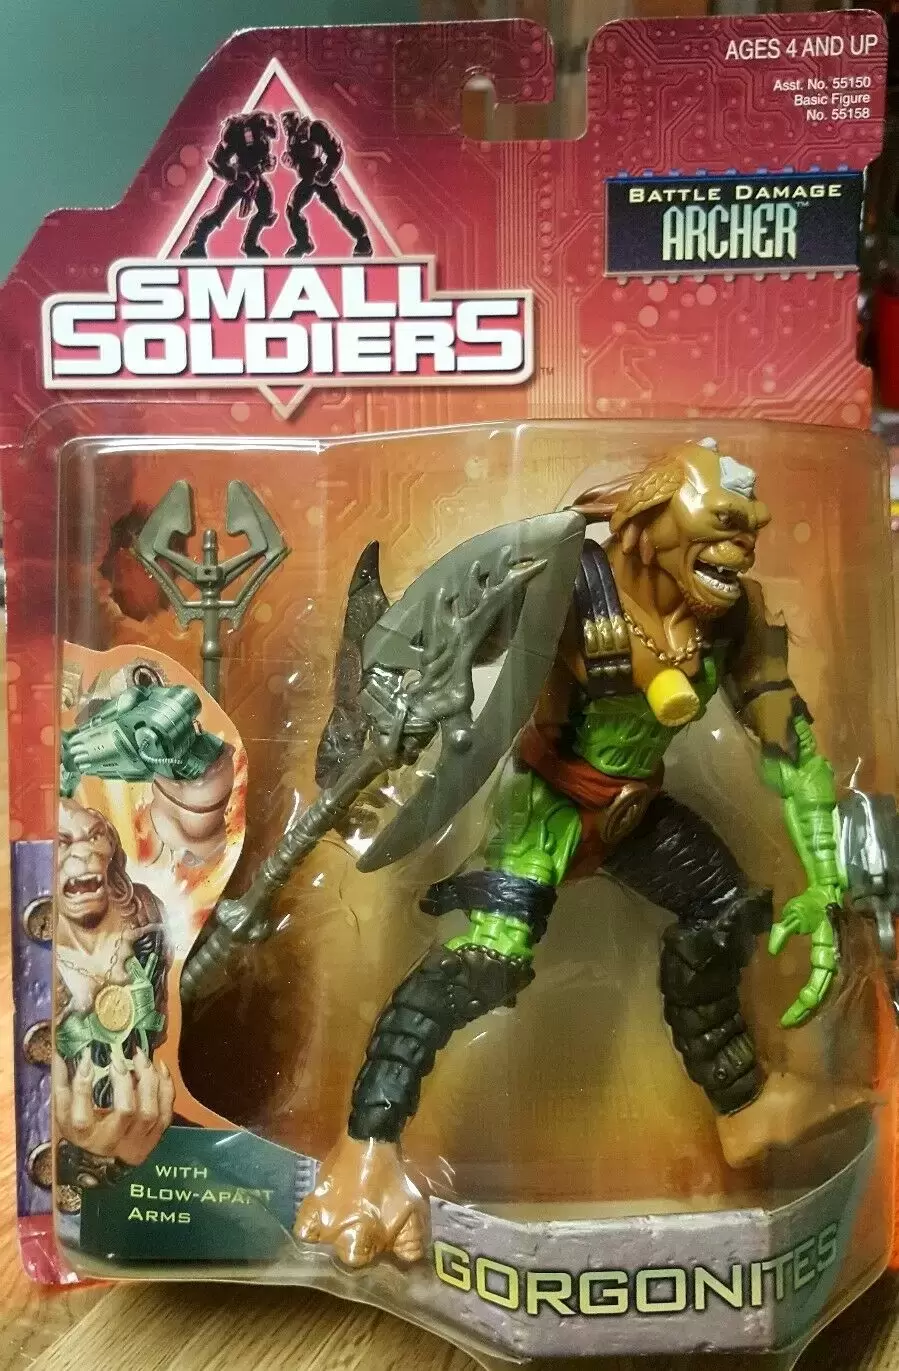 Small Soldiers - Archer Battle Damage